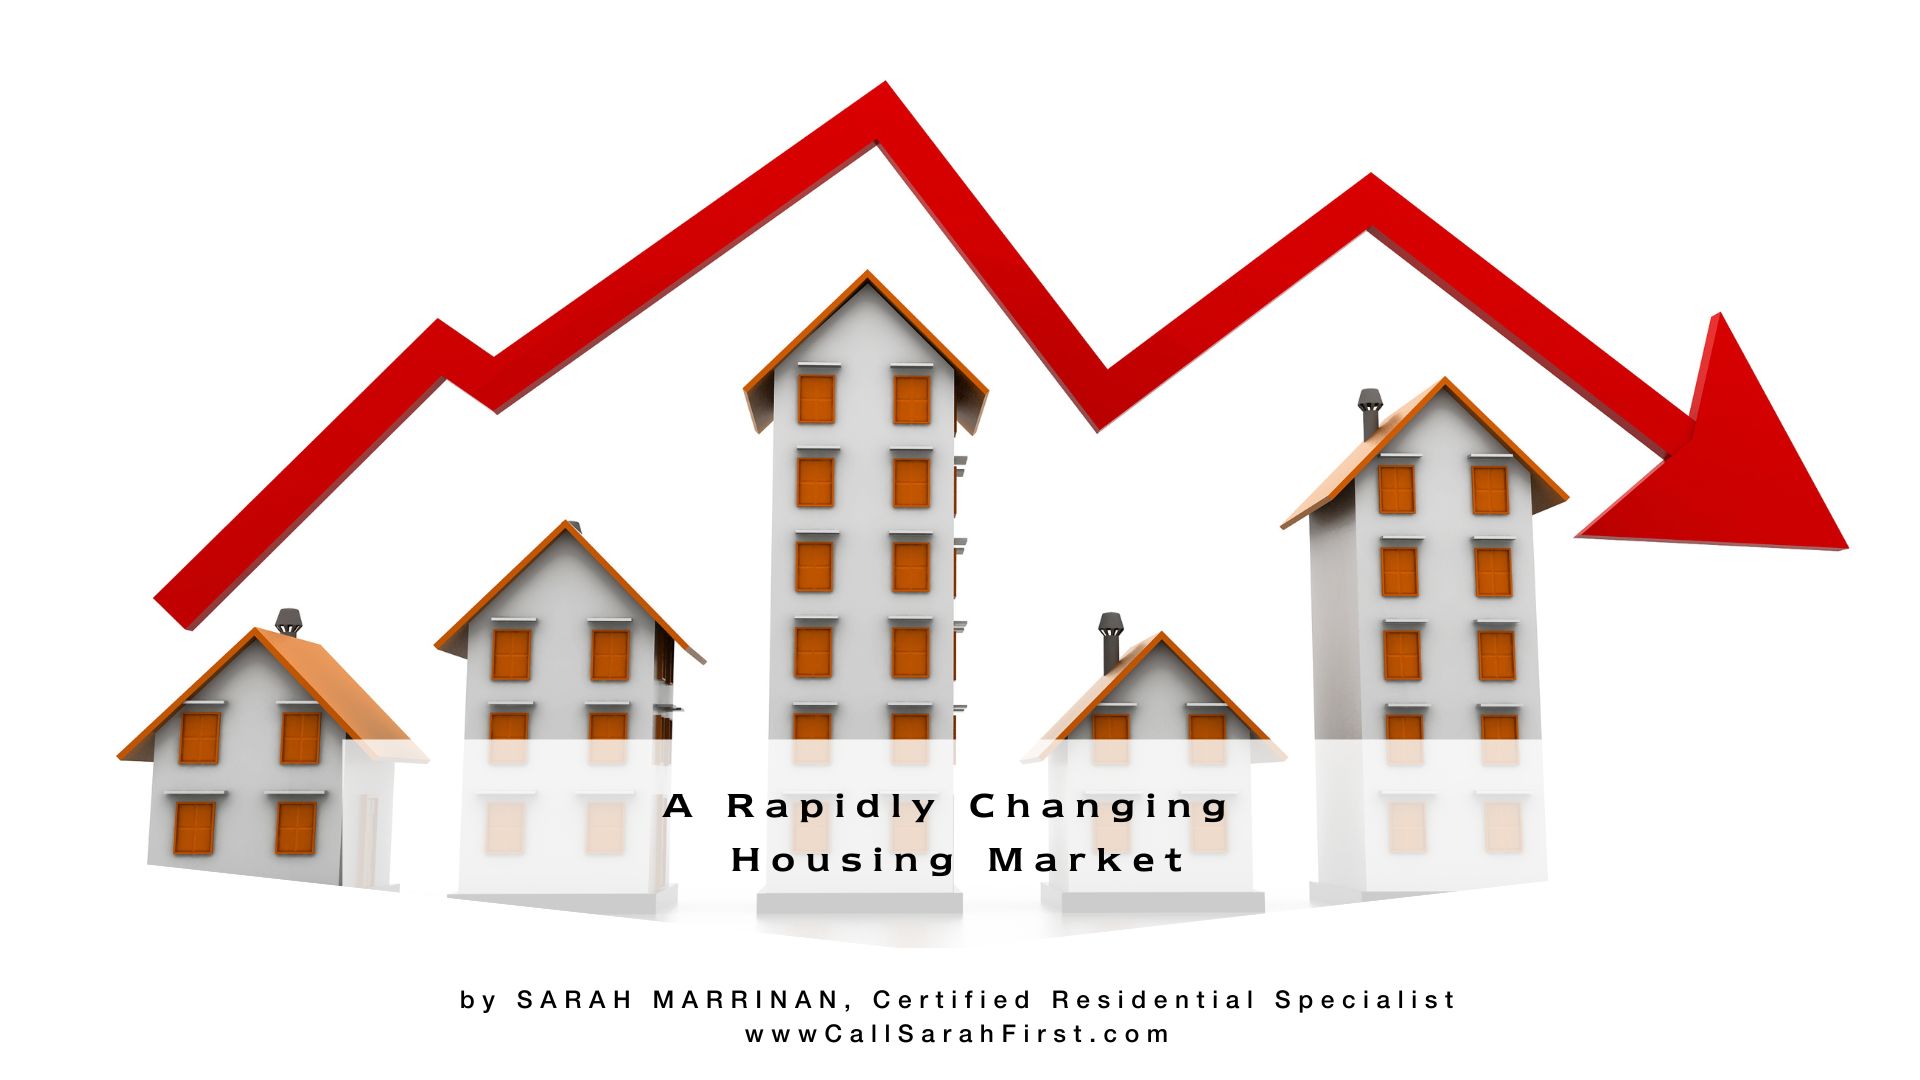 A Rapidly Changing Housing Market